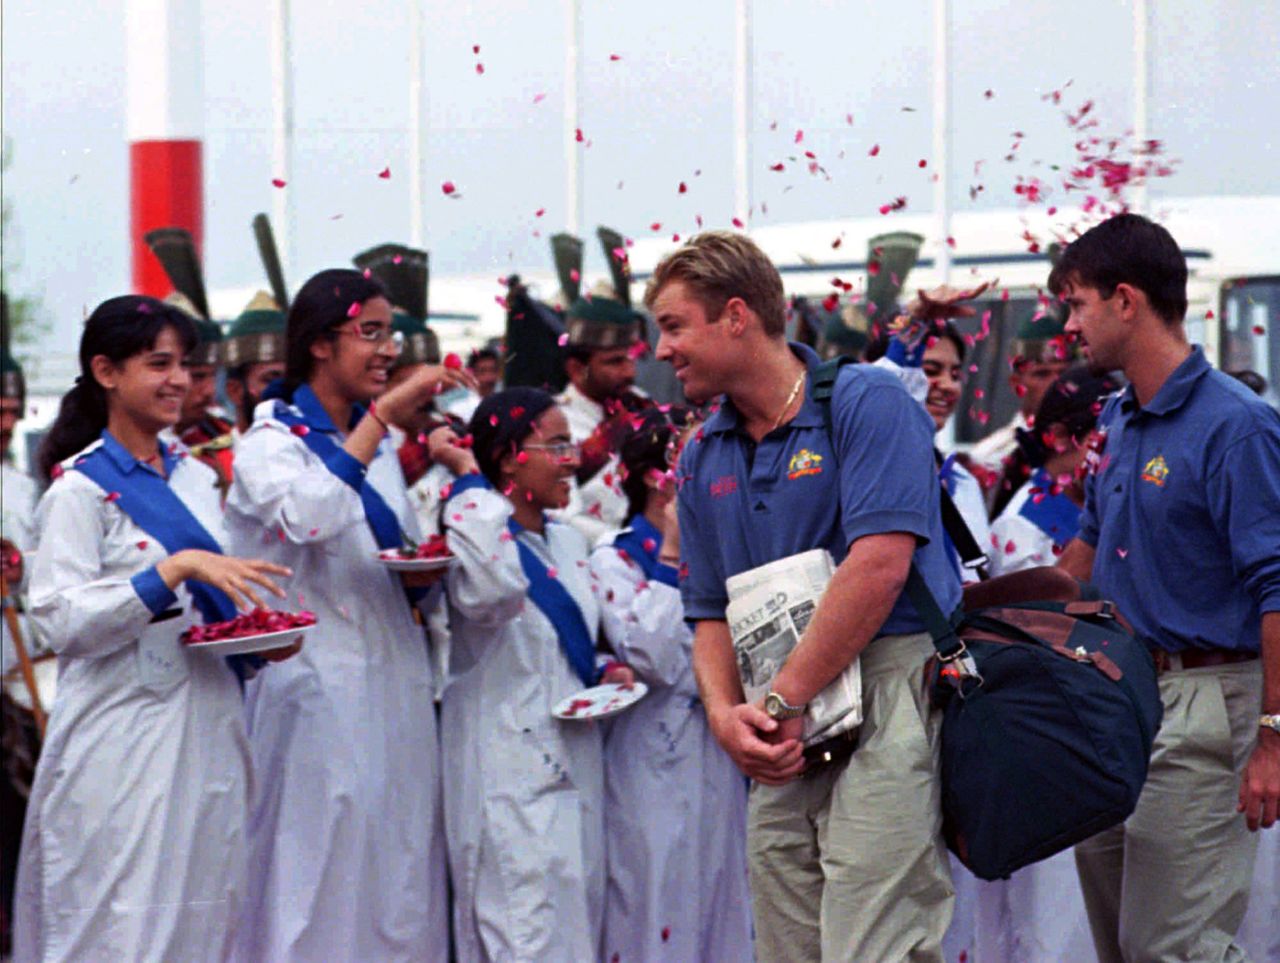 Shane Warne and Ricky Ponting get showered with rose petals by school kids in Lahore, March 15, 1996